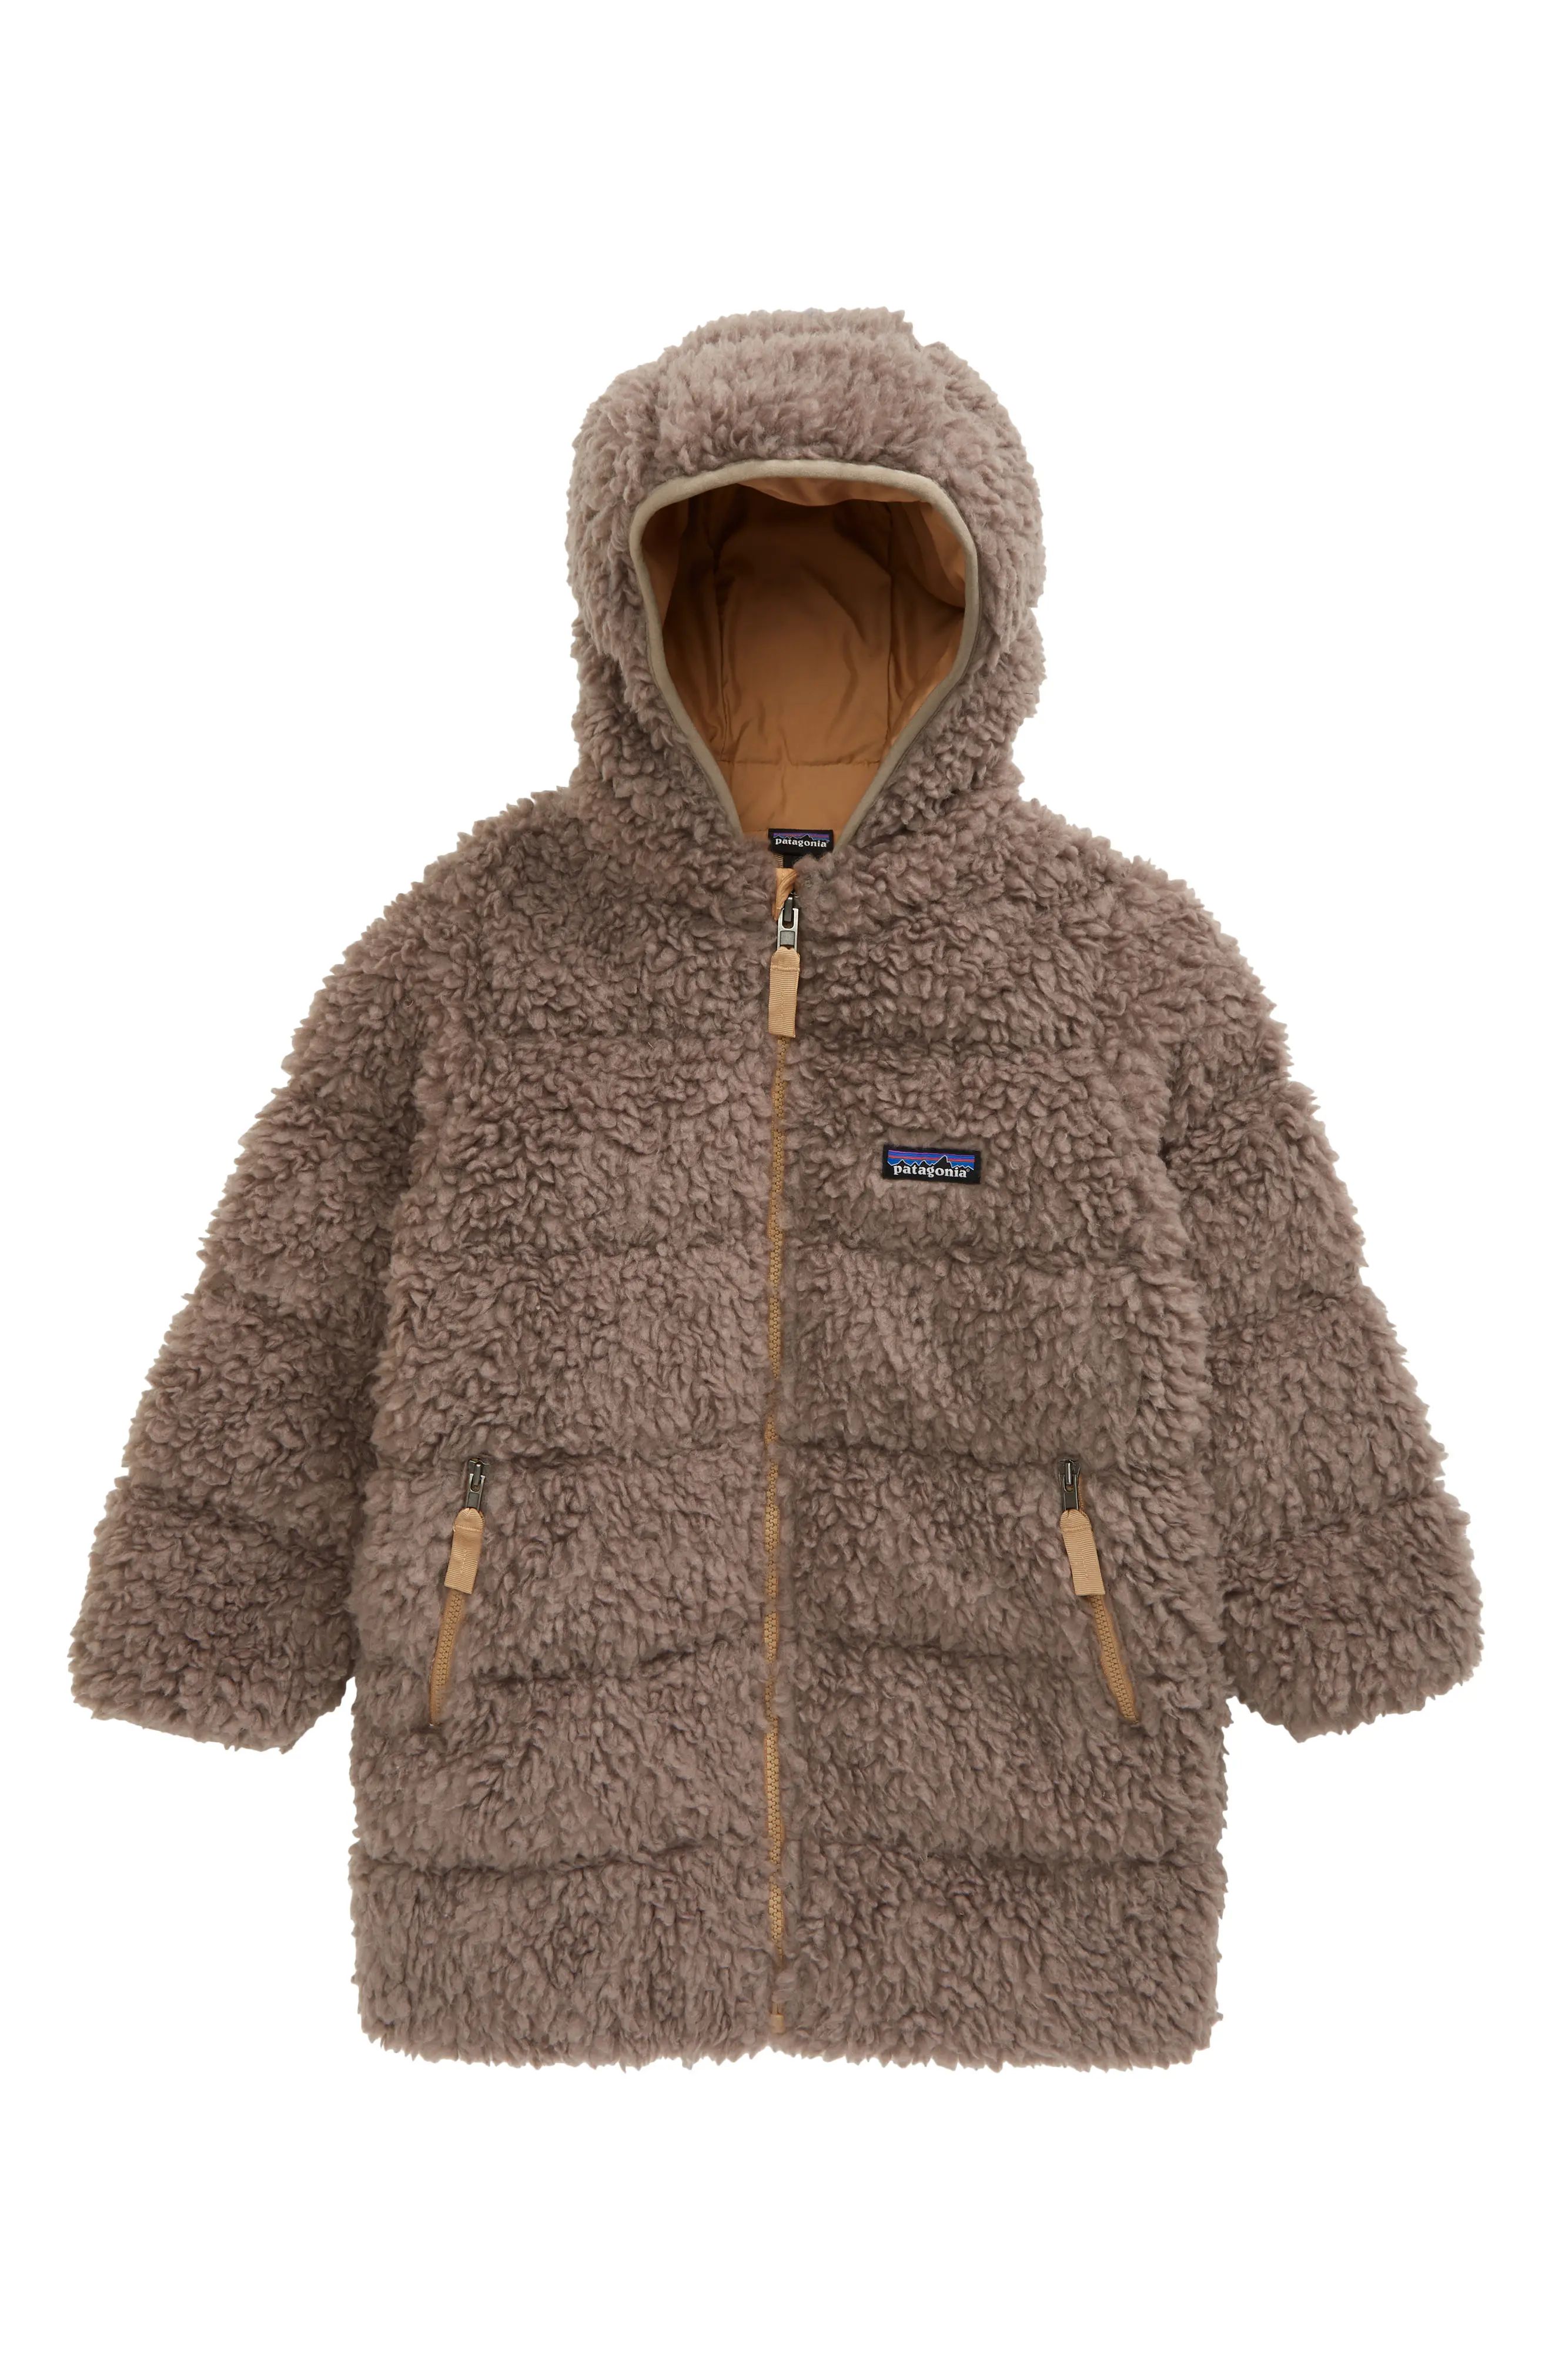 Toddler Boy's Patagonia Kids' Recycled Hi-Loft 700 Fill Power Down Parka, Size 3T - Beige | Nordstrom